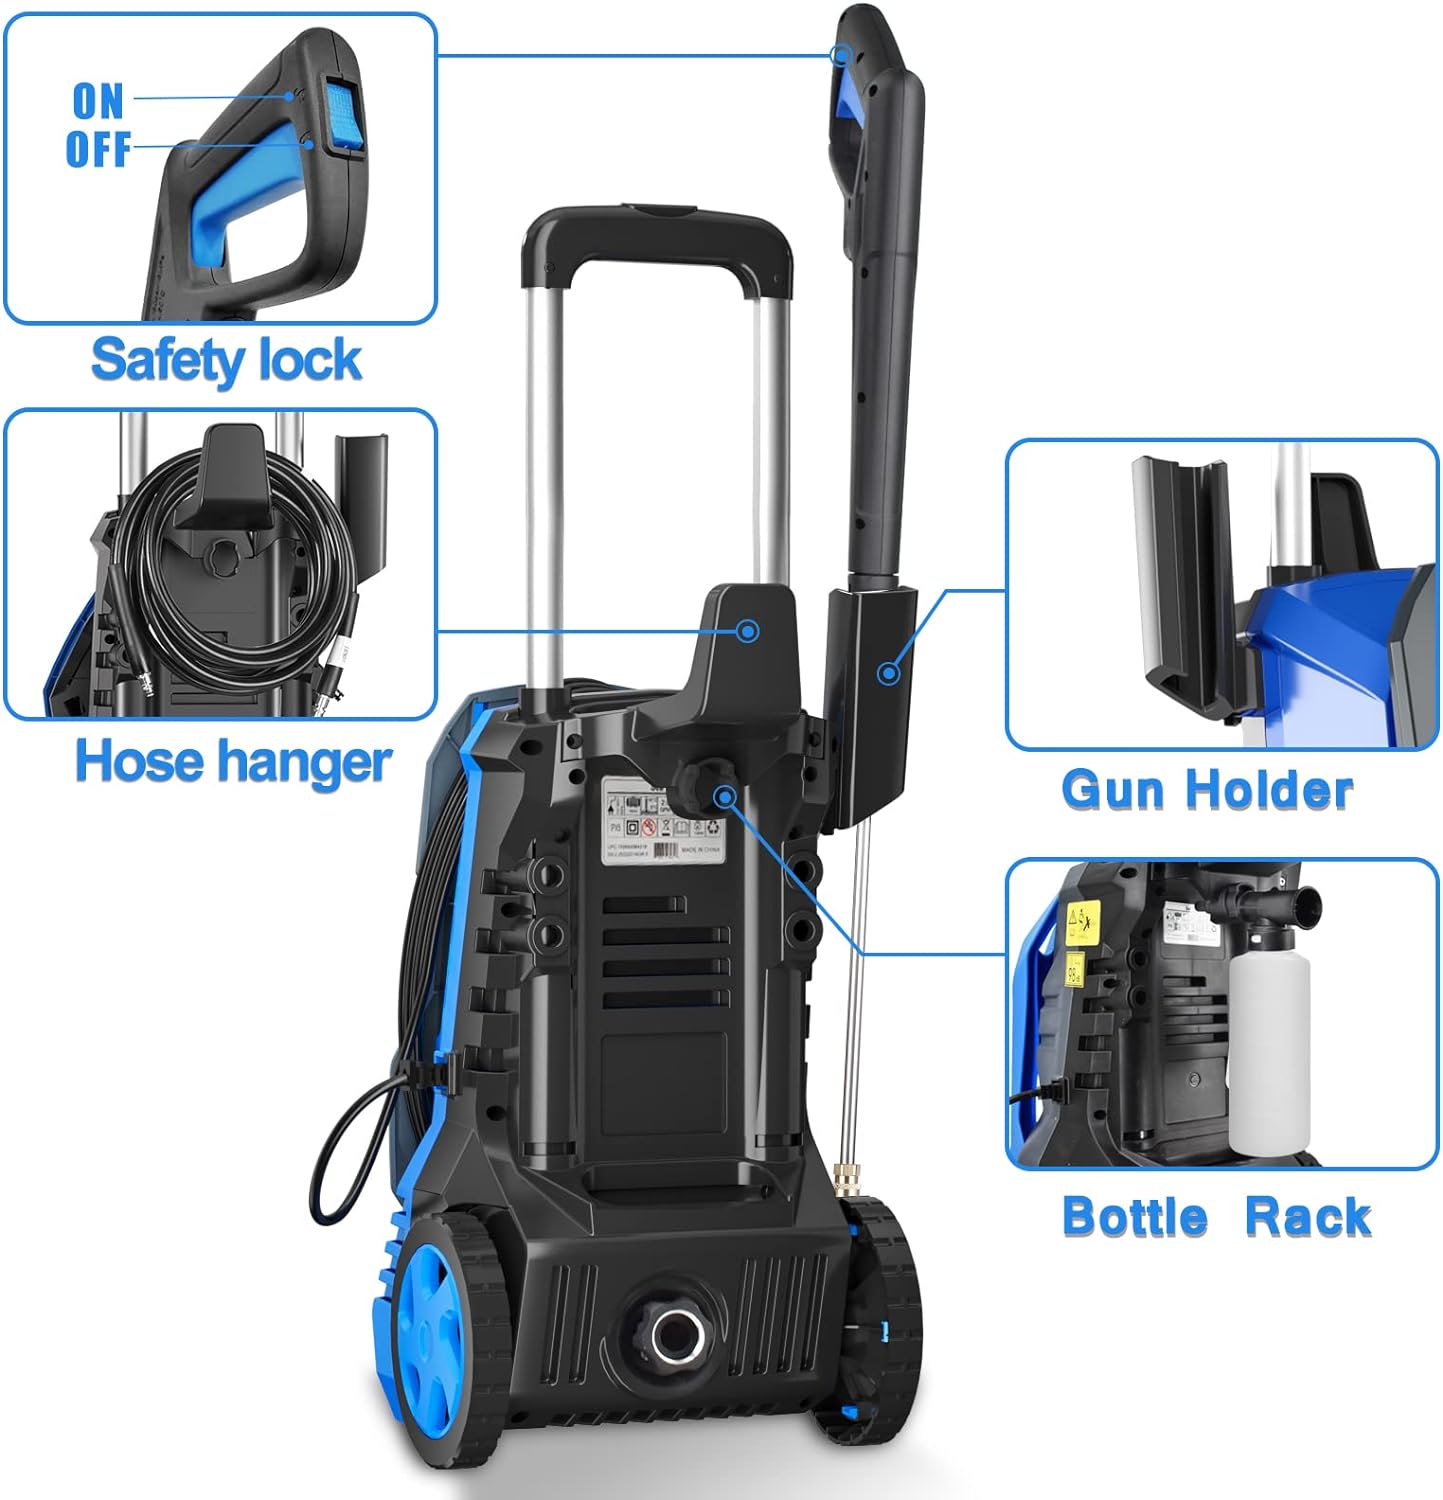 HONGDONG Pressure Washer for Floor Cleaning - Electric High Pressure Washer, Cleans Cars and Patios